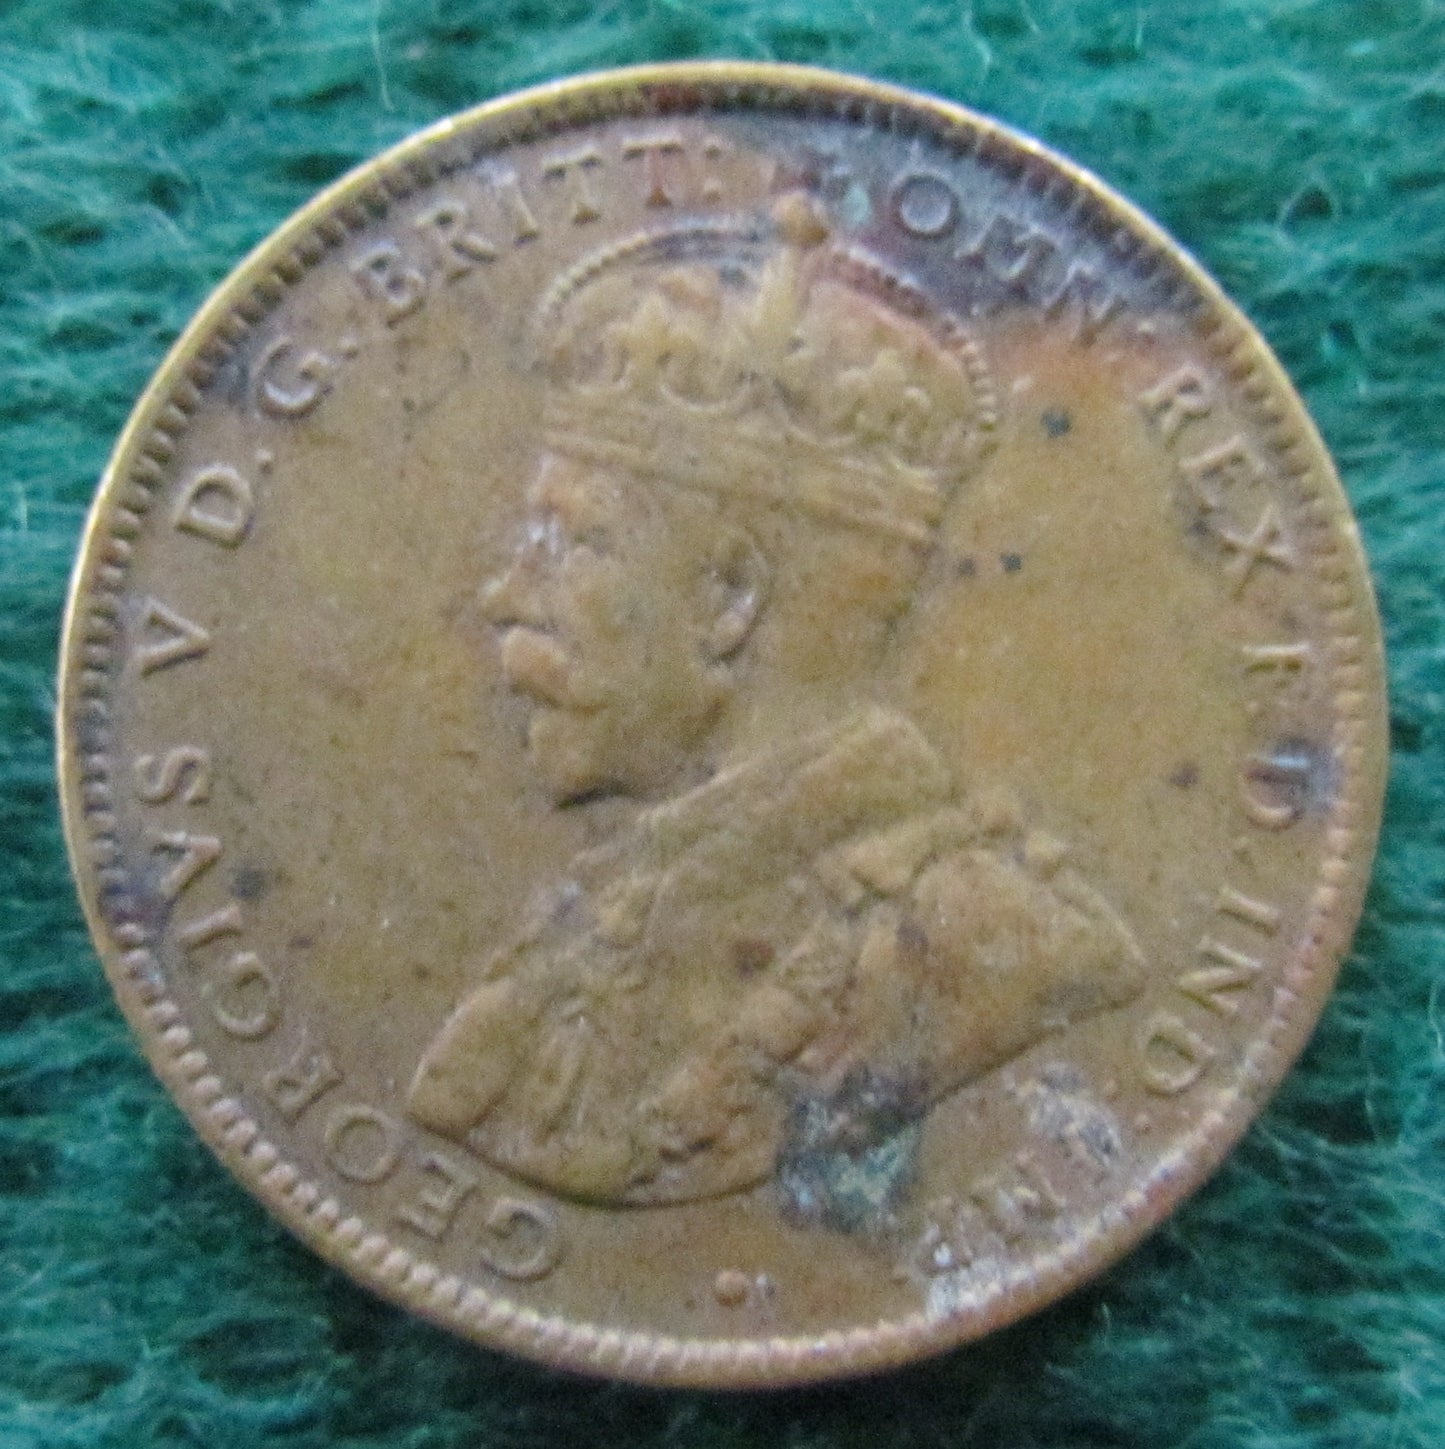 British West Africa 1920 1 Shilling King George V Coin - Circulated